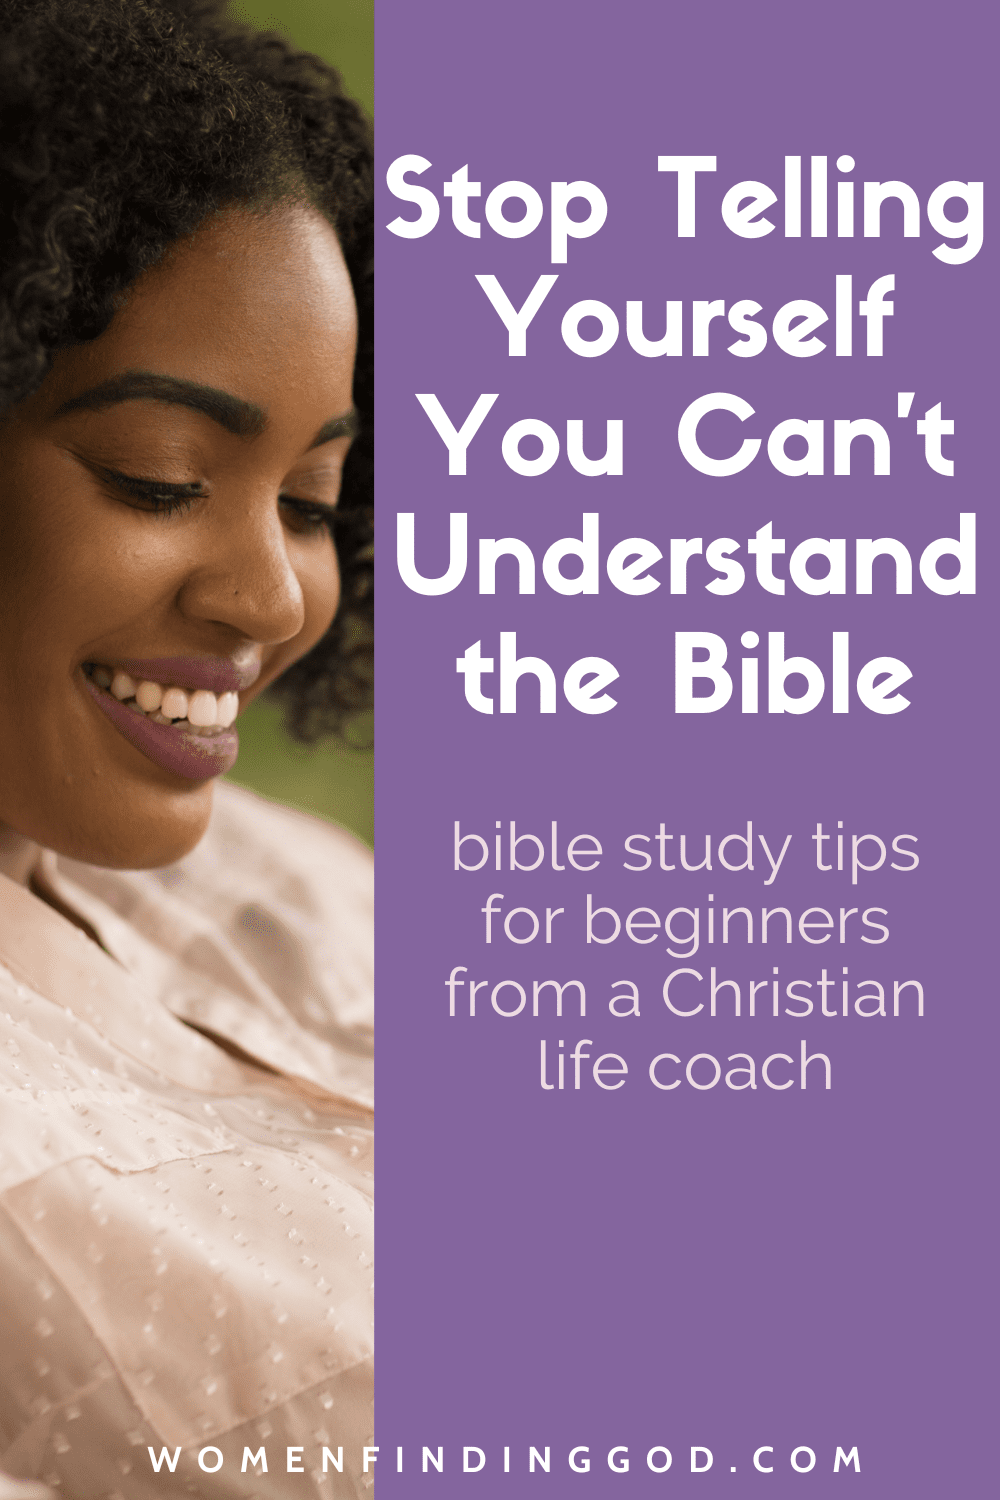 Are you ready to learn how to study the bible yourself? Learn 5 ways to study the bible without a guide or videos and how to choose a bible - so you can actually understand what you’re reading. Plus, tips about how to decide what to study in your bible, the best bible study tools for beginners, and what do you when you fail behind in your bible study. Everything you need to know when you are learning how to study the bible as a beginner! via @womenfindinggod